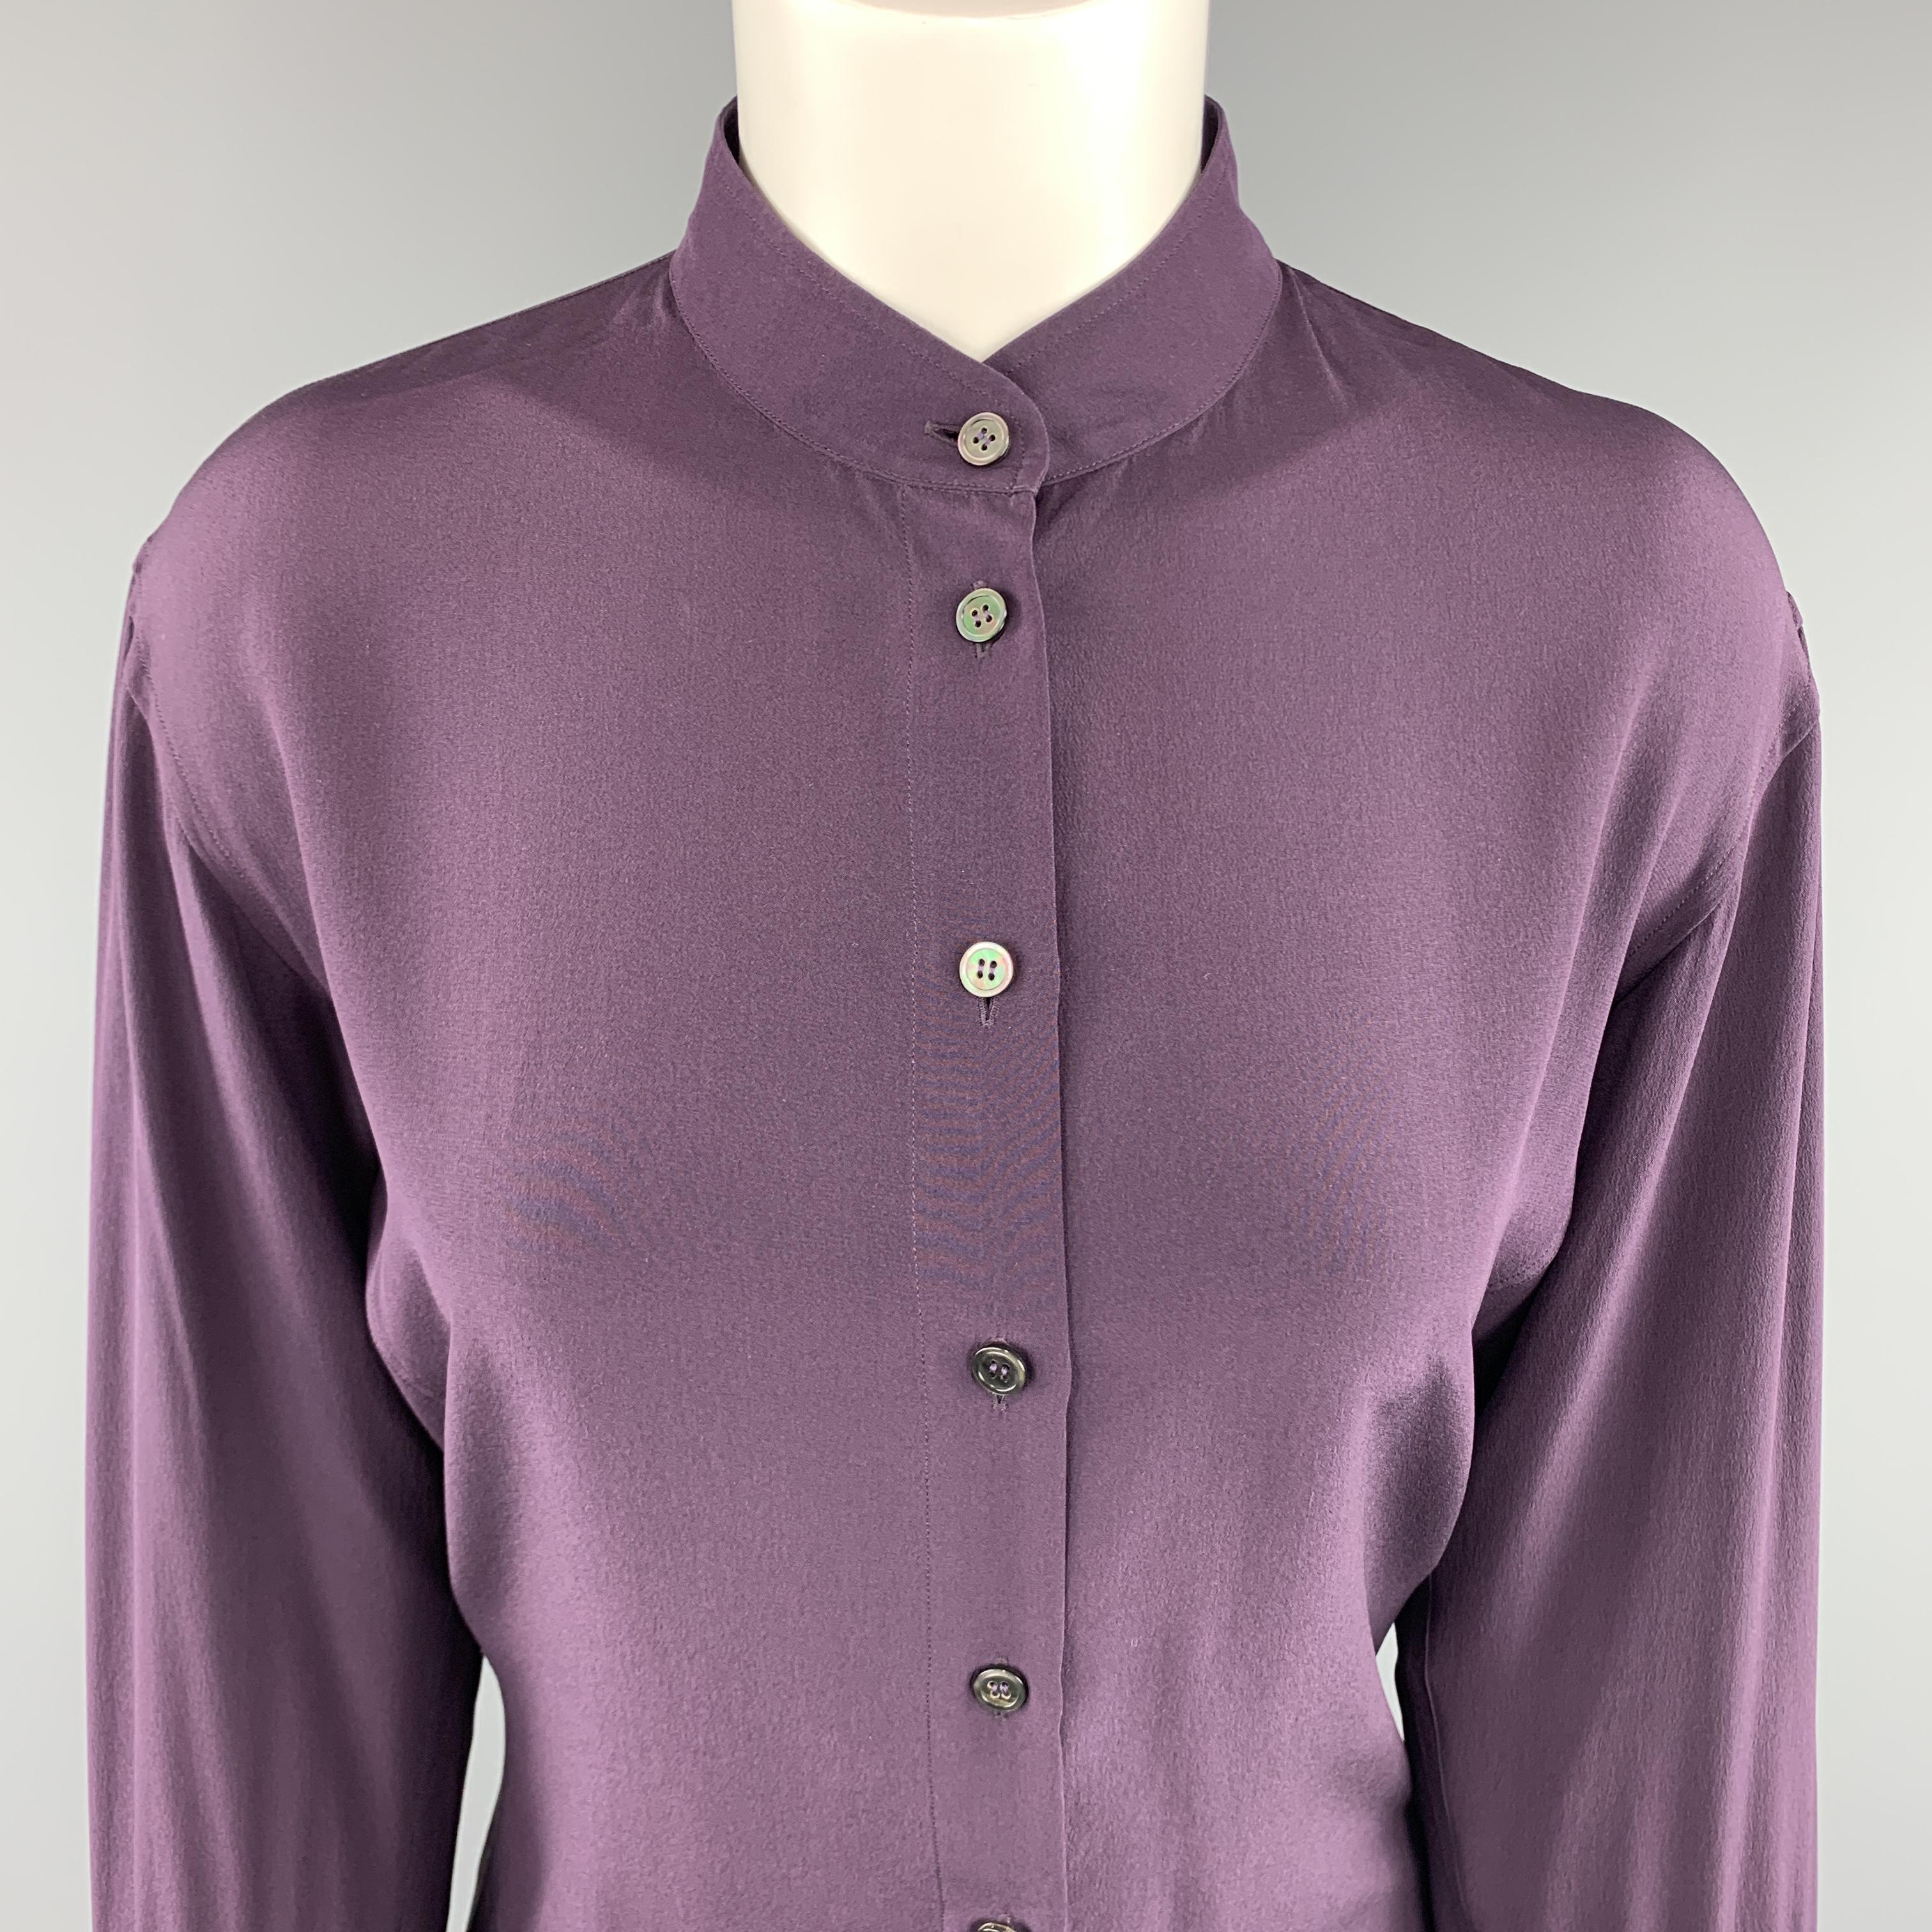 Archive YVES SAINT LAURENT blouse comes in plum purple silk with a band collar and extended ten button cuffs. Made in Italy.

Excellent Pre-Owned Condition.
Marked: (no size)

Measurements:

Shoulder: 18 in.
Bust: 36 in.
Sleeve: 25 in.
Length: 24 in.